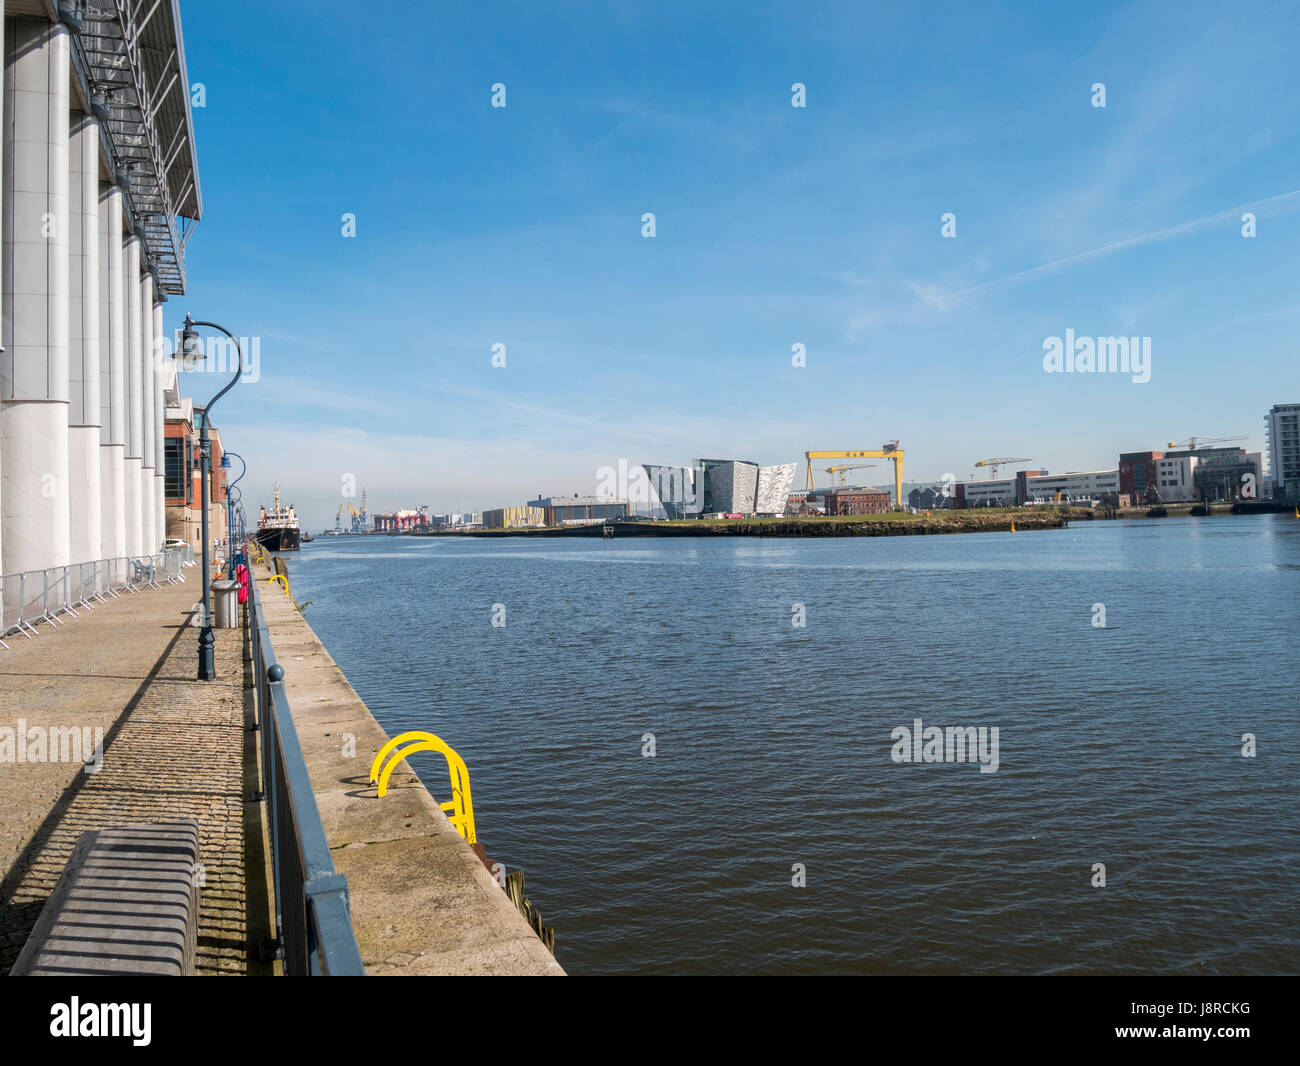 Titanic Building viewed from the area of Clarendon Dock. One of the giant Harland and Wolff cranes can be seen to the right of the building Stock Photo